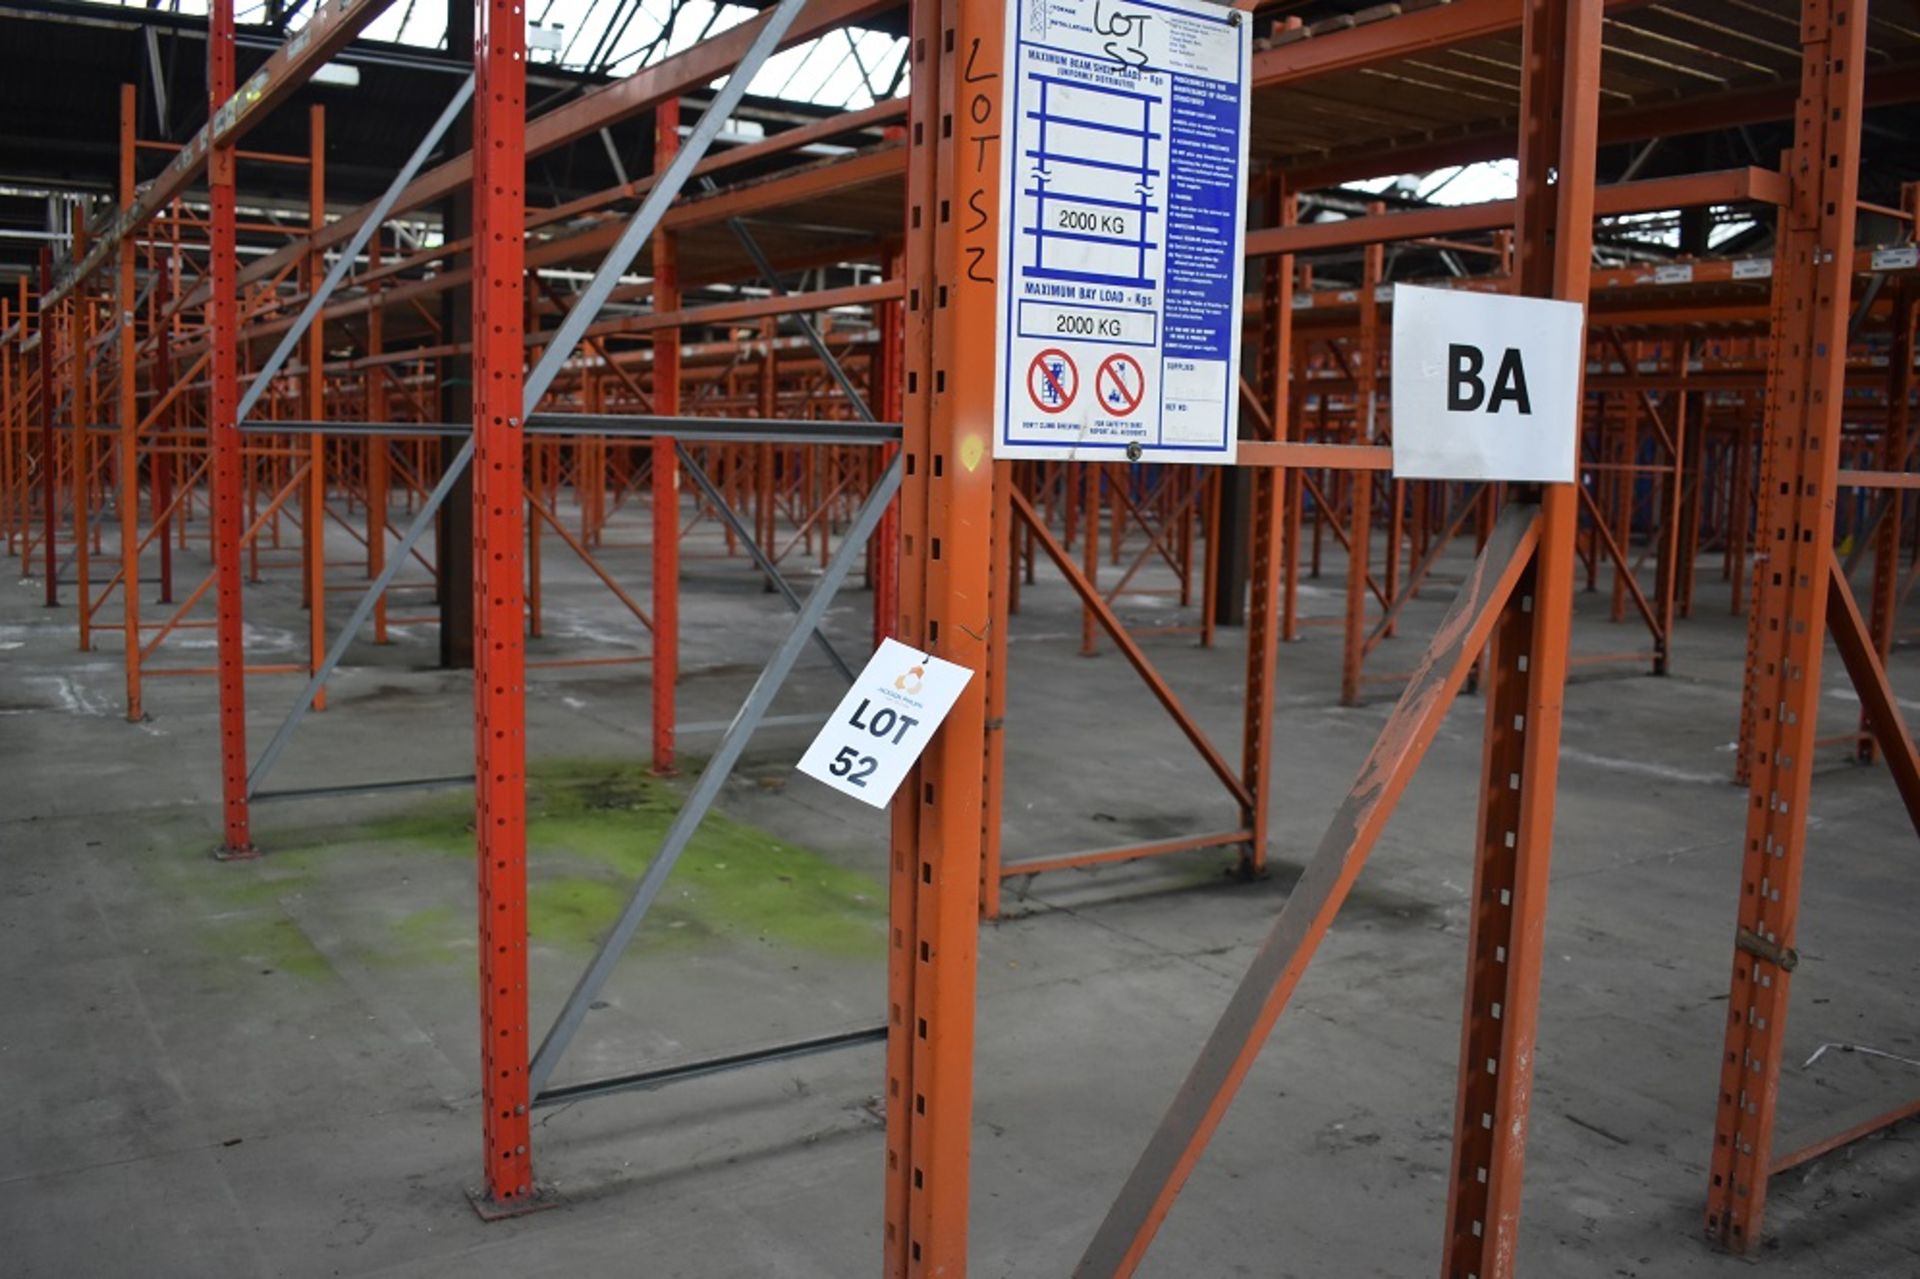 22 X BAYS OF 3 MTR HIGH BOLTLESS PALLET RACKING CONSISTING OF 46 BEAMS 22 X FRAMES